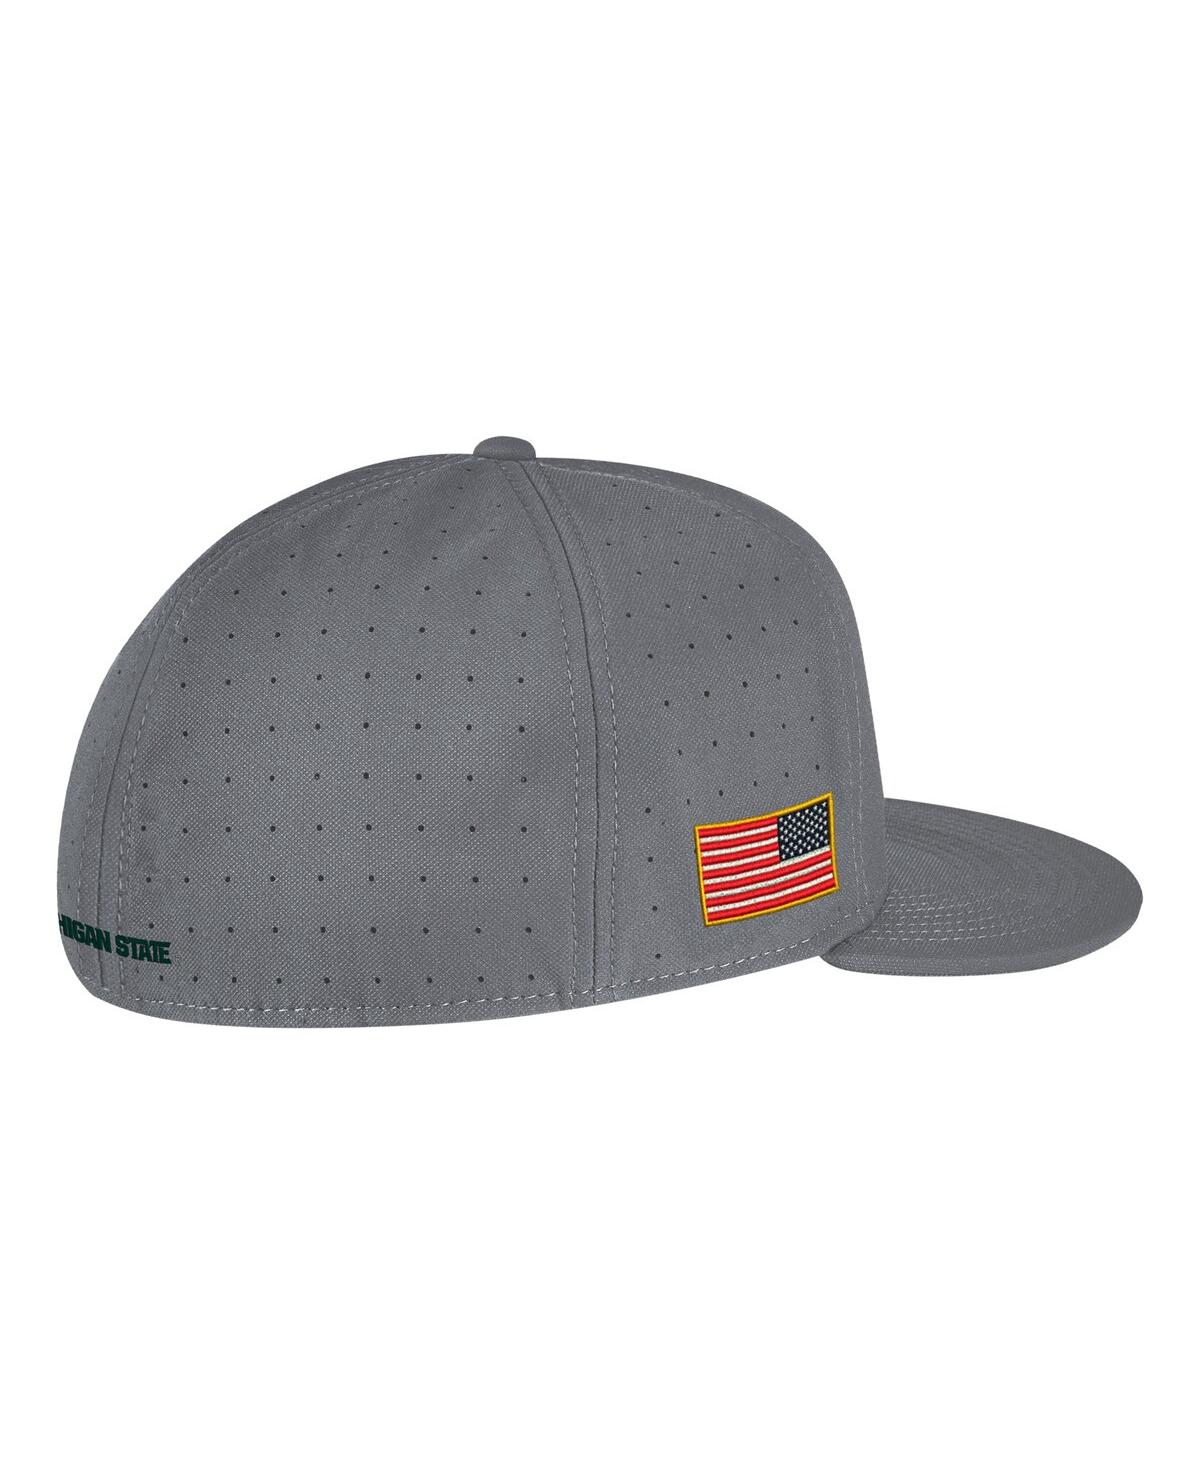 Shop Nike Men's  Gray Michigan State Spartans Usa Side Patch True Aerobill Performance Fitted Hat